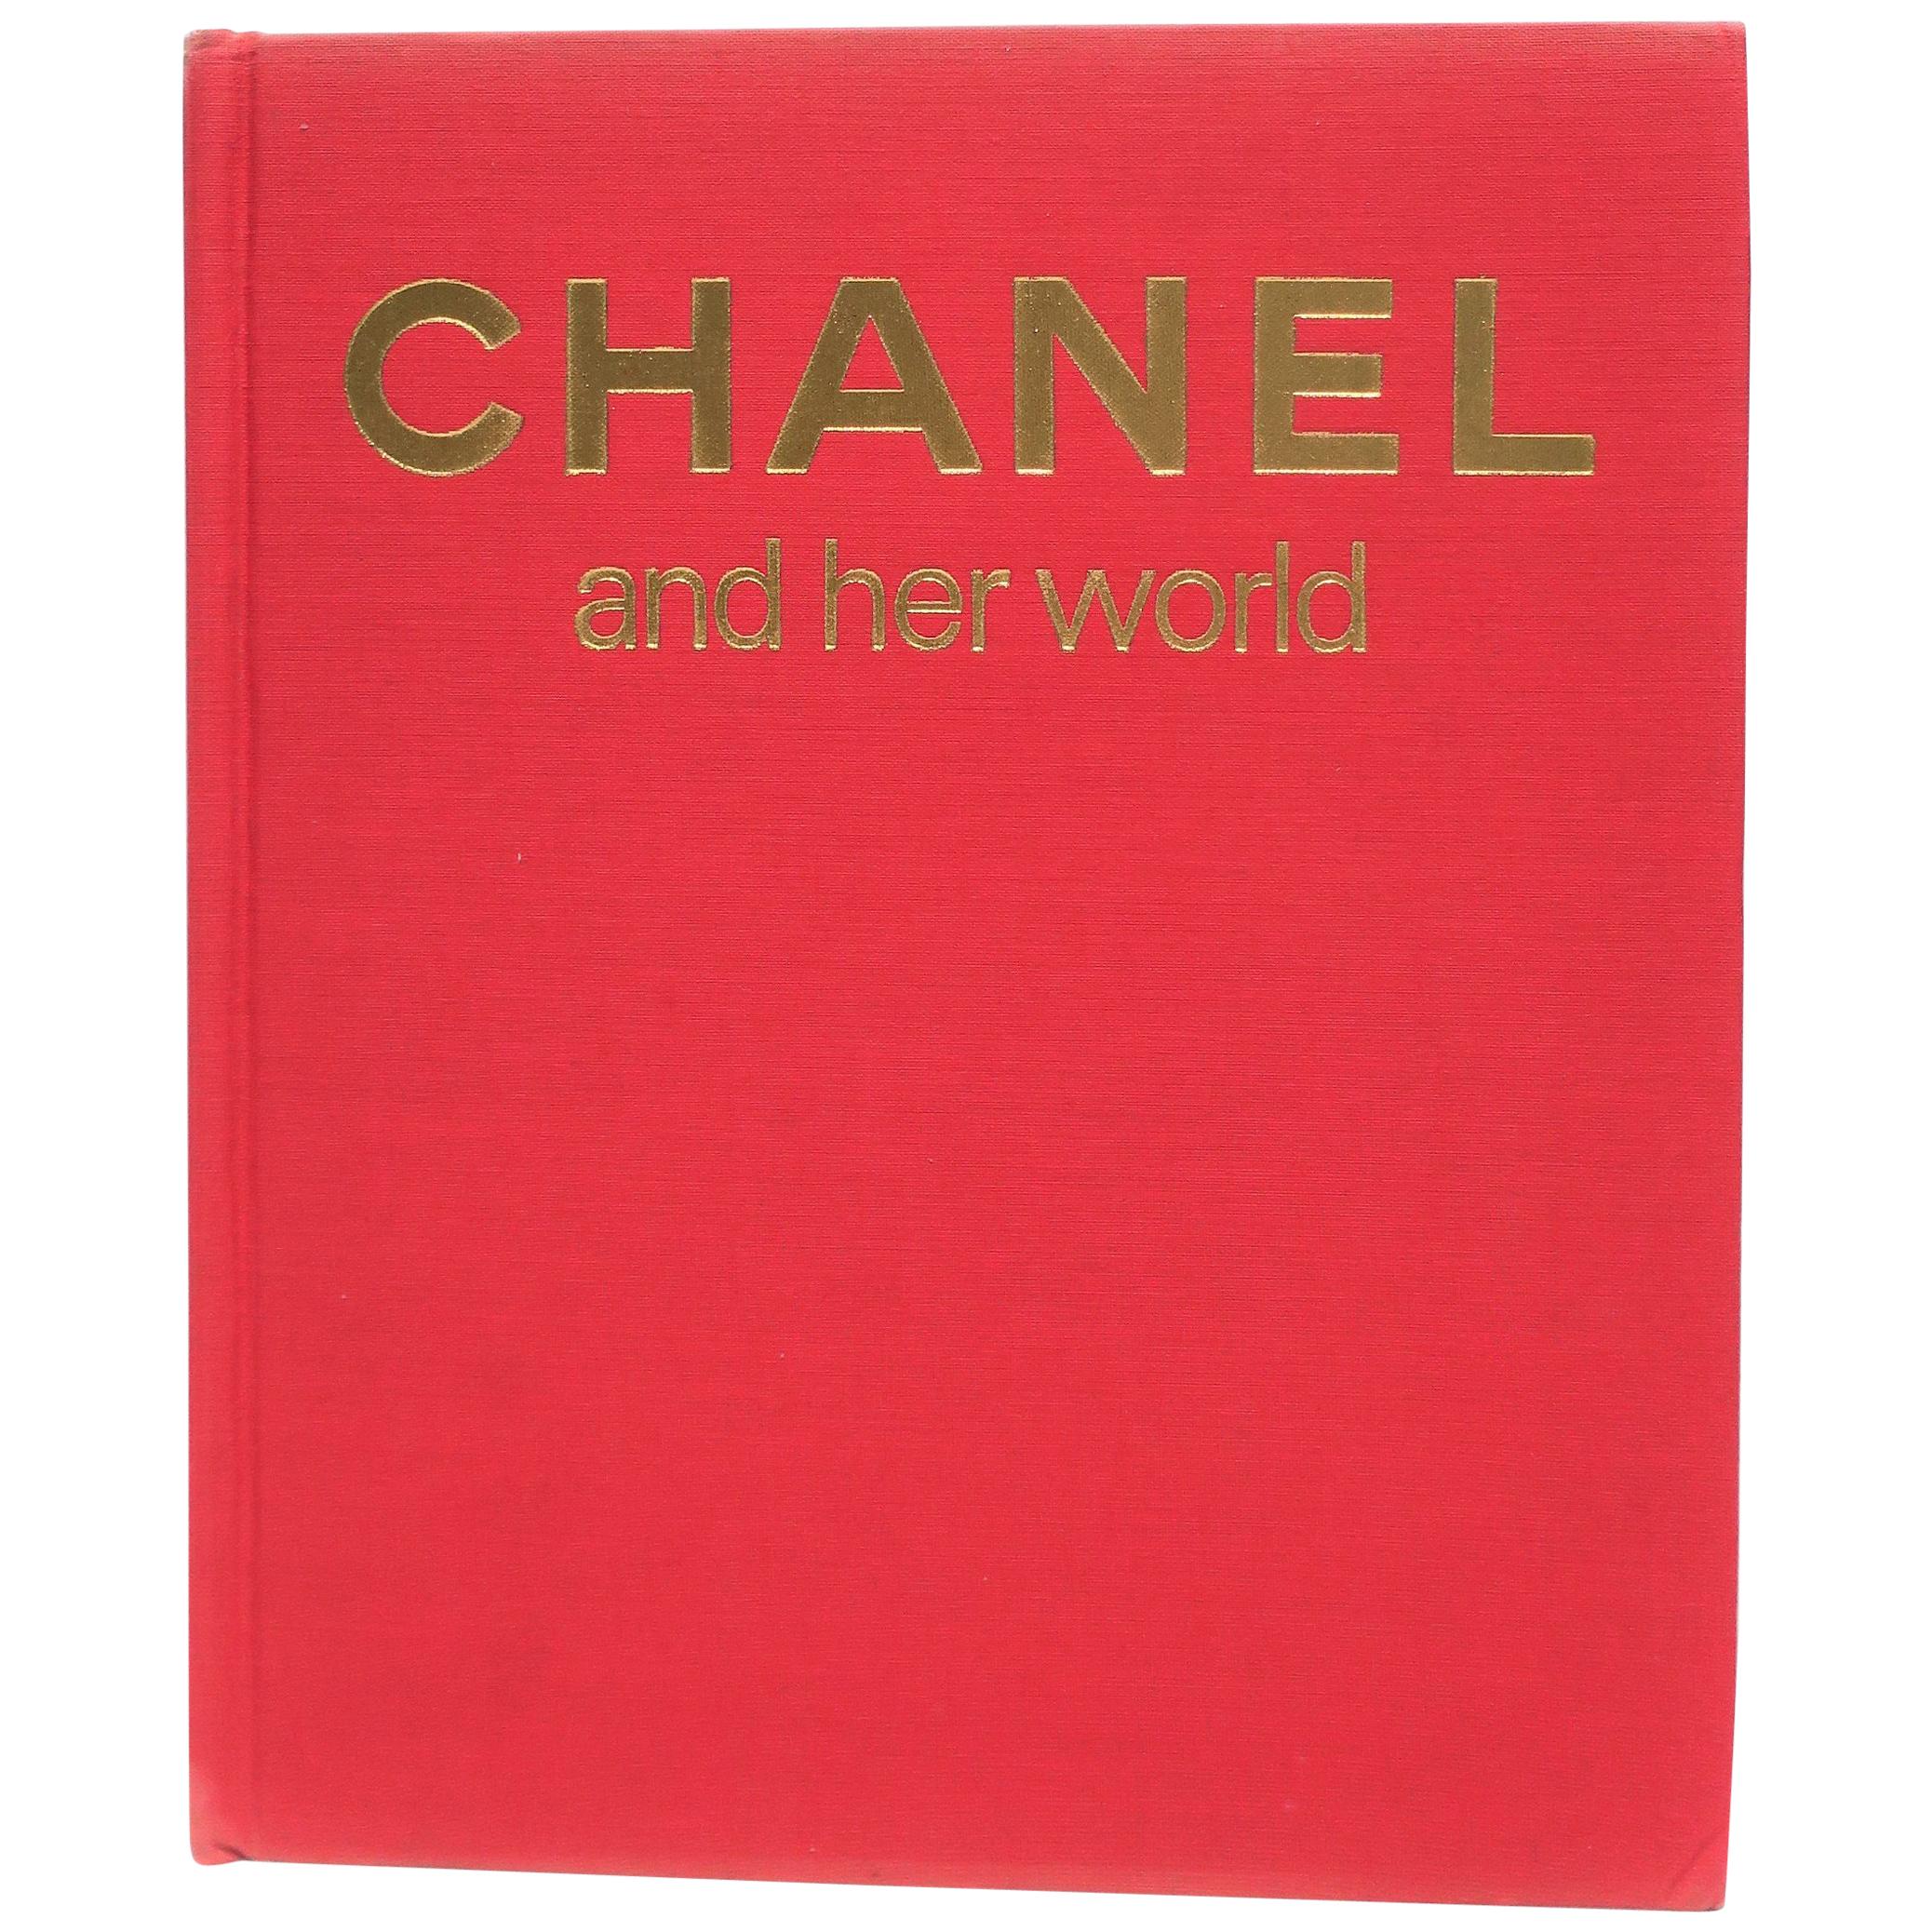 Chanel and Her World Hardcover Coffee Table Book Edmonde Charles-Roux New  Sealed